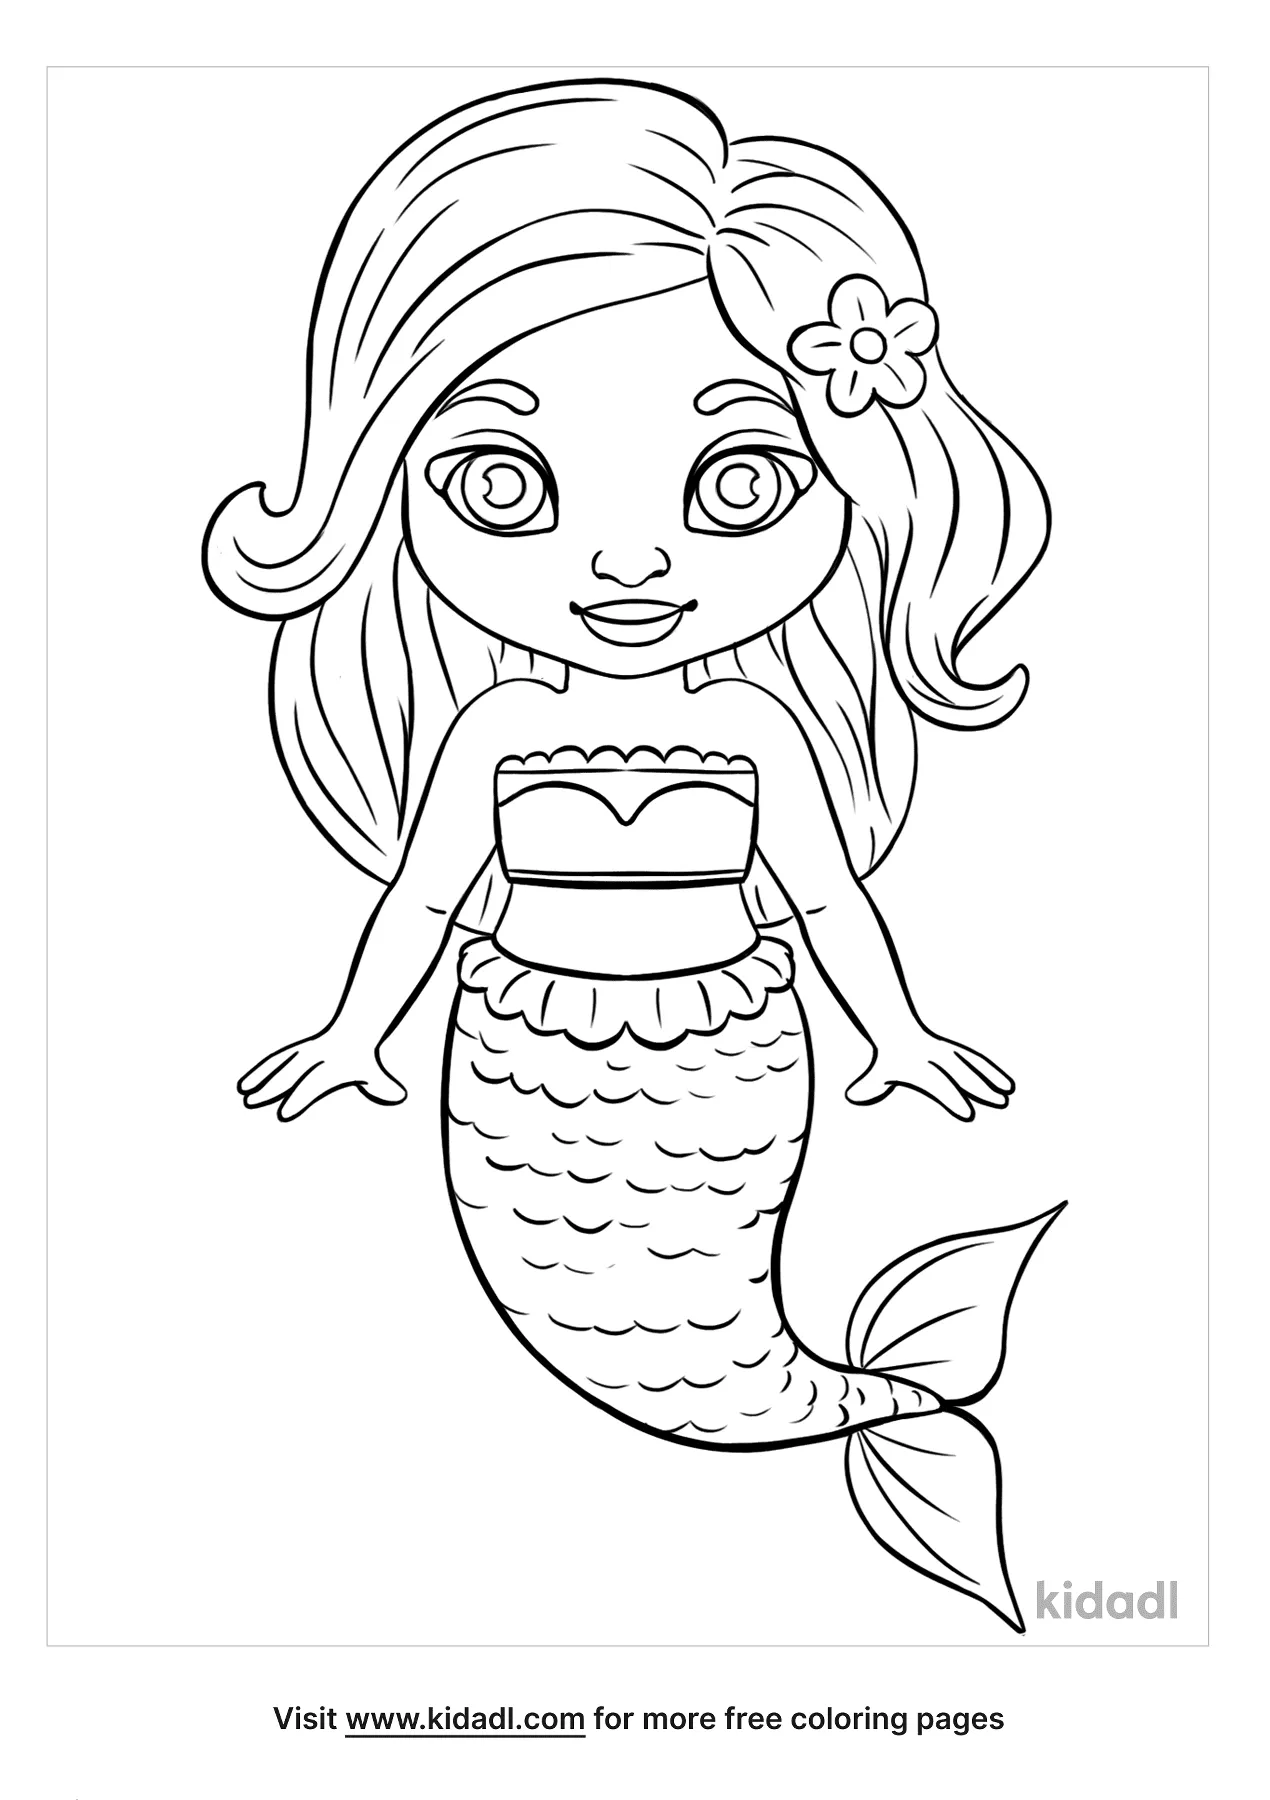 The Little Mermaid More Coloring Pages